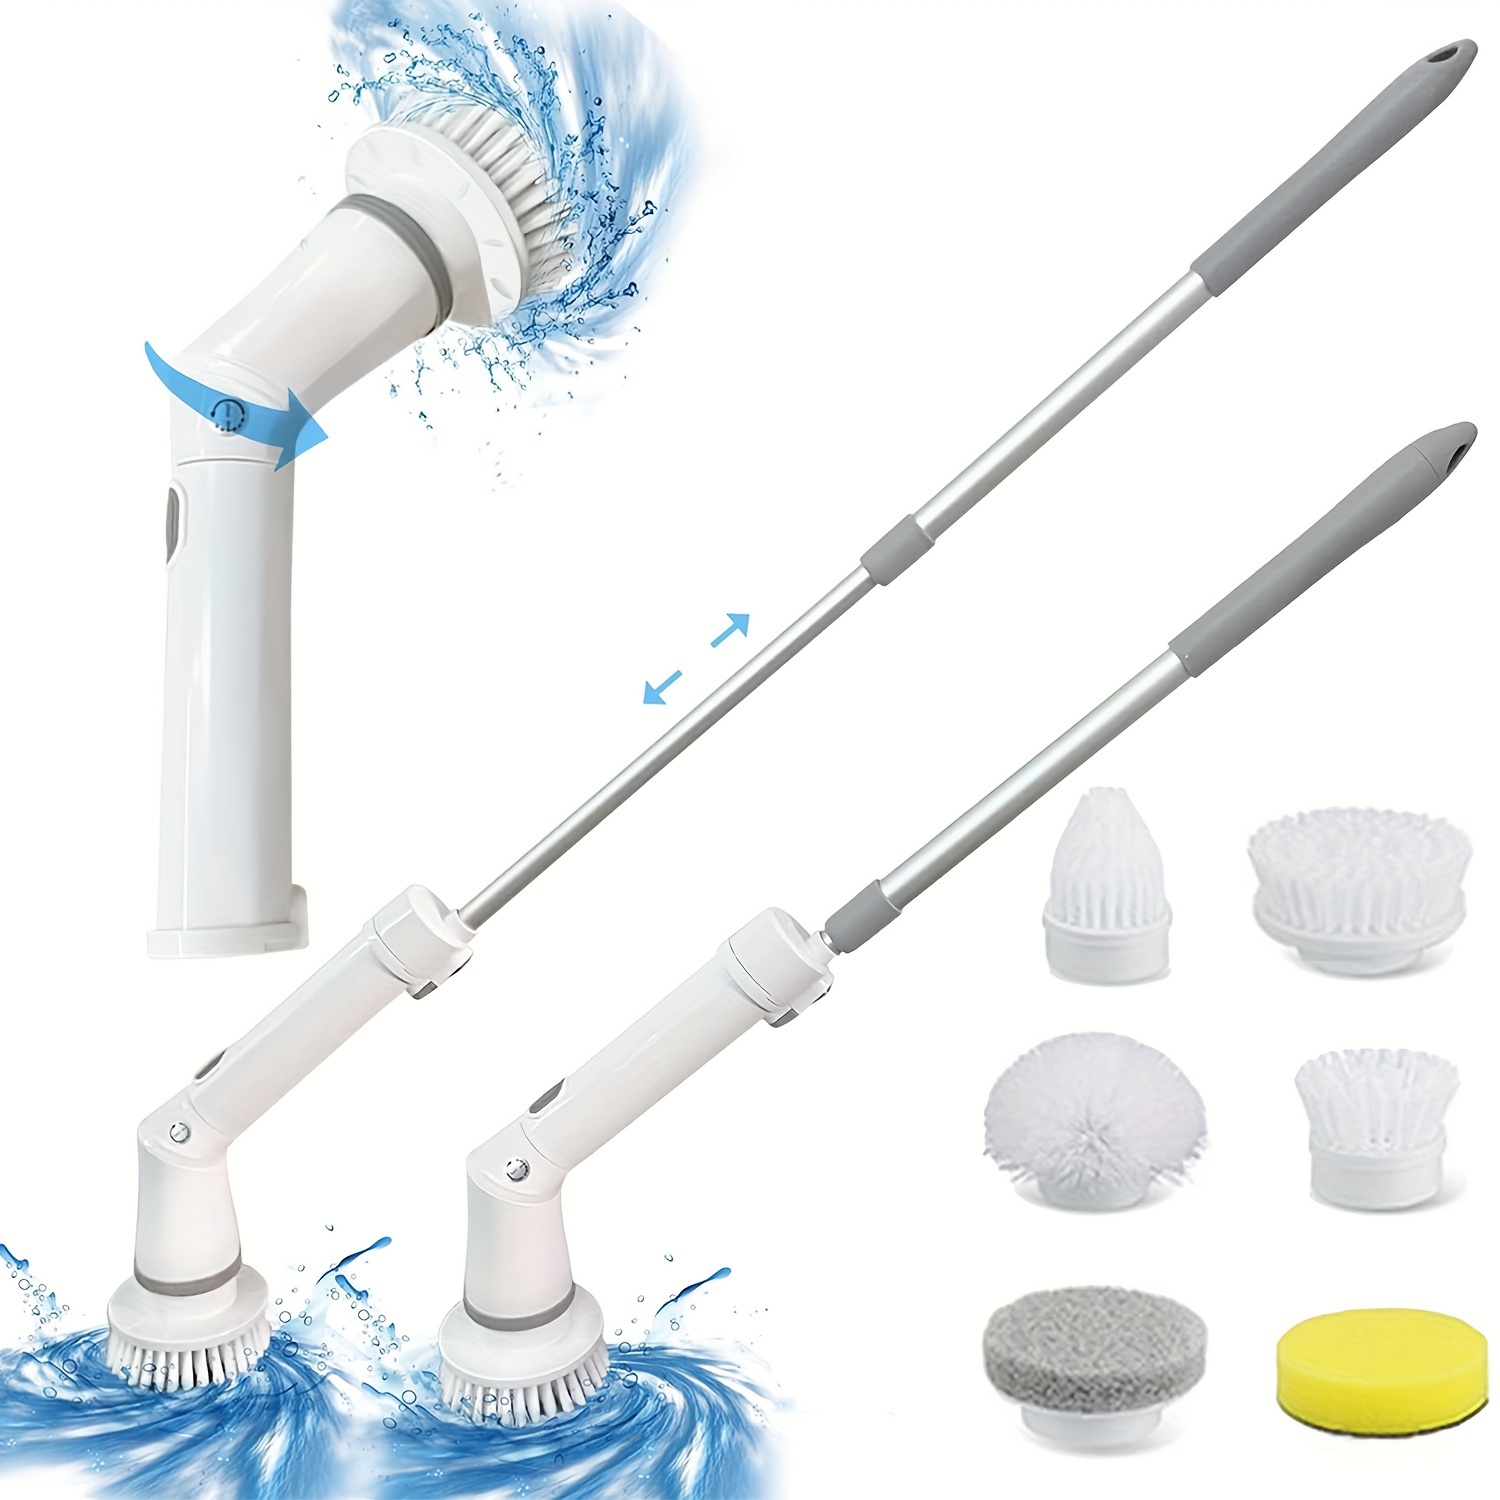 

Electric Spin Scrubber, Upgrade 2 Speeds Cordless Shower Cleaning Scrubber With Long Handle & 6 Replaceable Brushes For Shower Cleaning Scrubber To Kitchens, Car, Tile, Floor